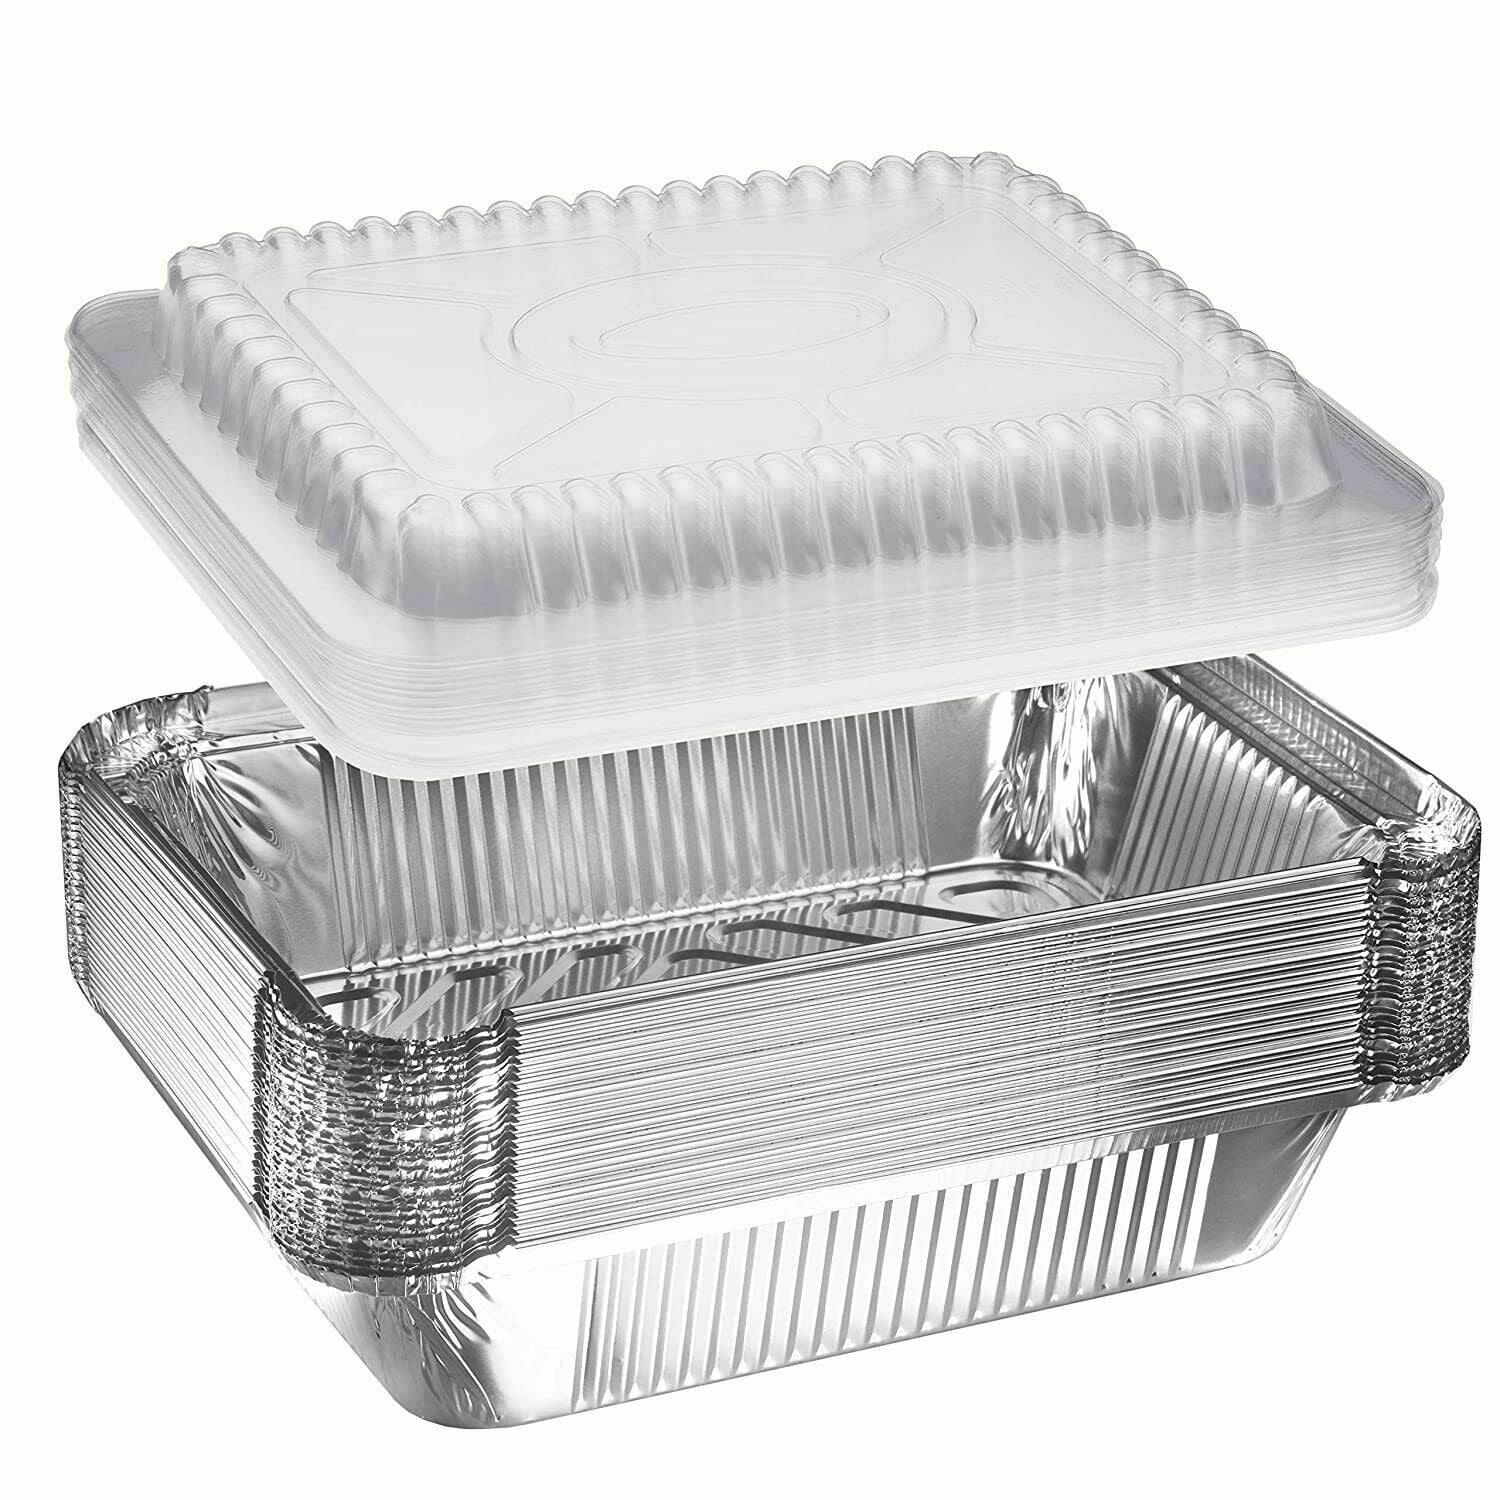 Idl Packaging Flat Foil-Covered Cardboard Lids for 4 lb. Oblong Aluminum Pans 13 inch x 9 inch (Pack of 10)